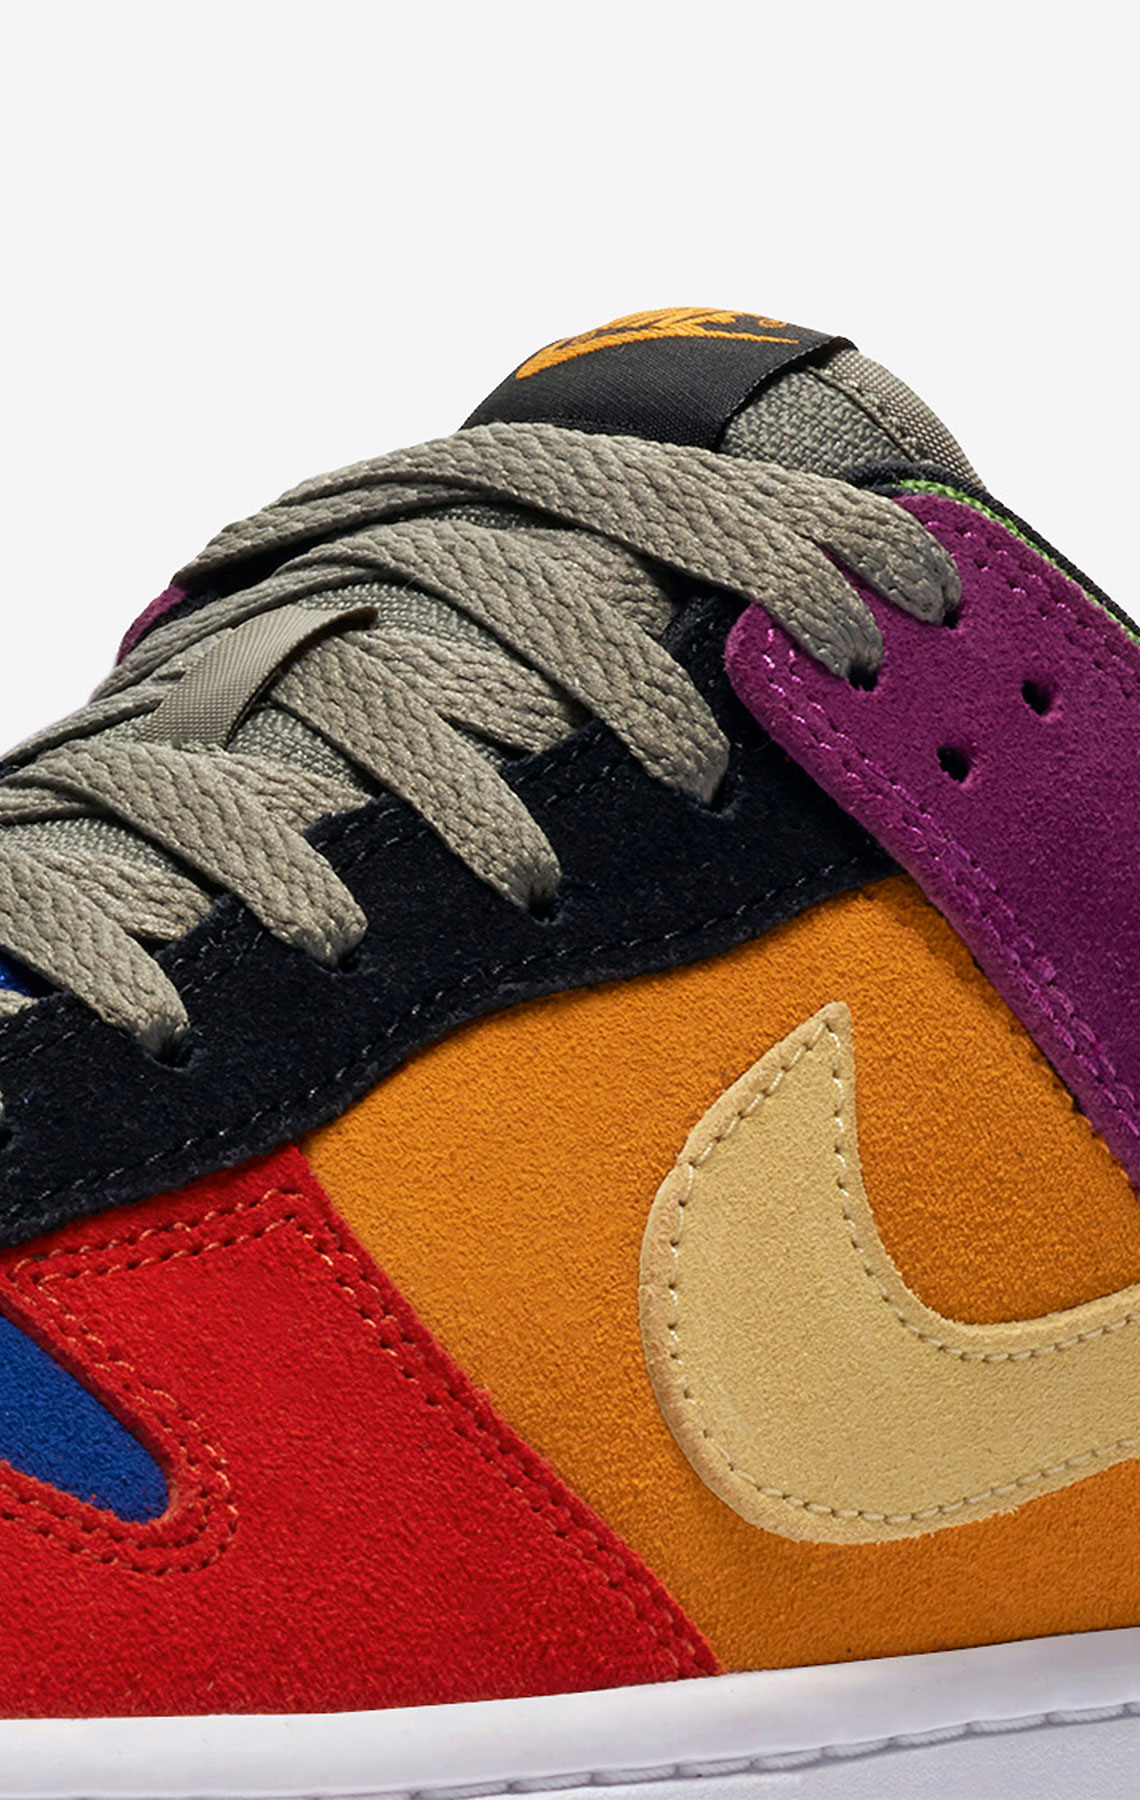 Nike Dunk Low Viotech CT5050-500 Release Date | SneakerNews.com